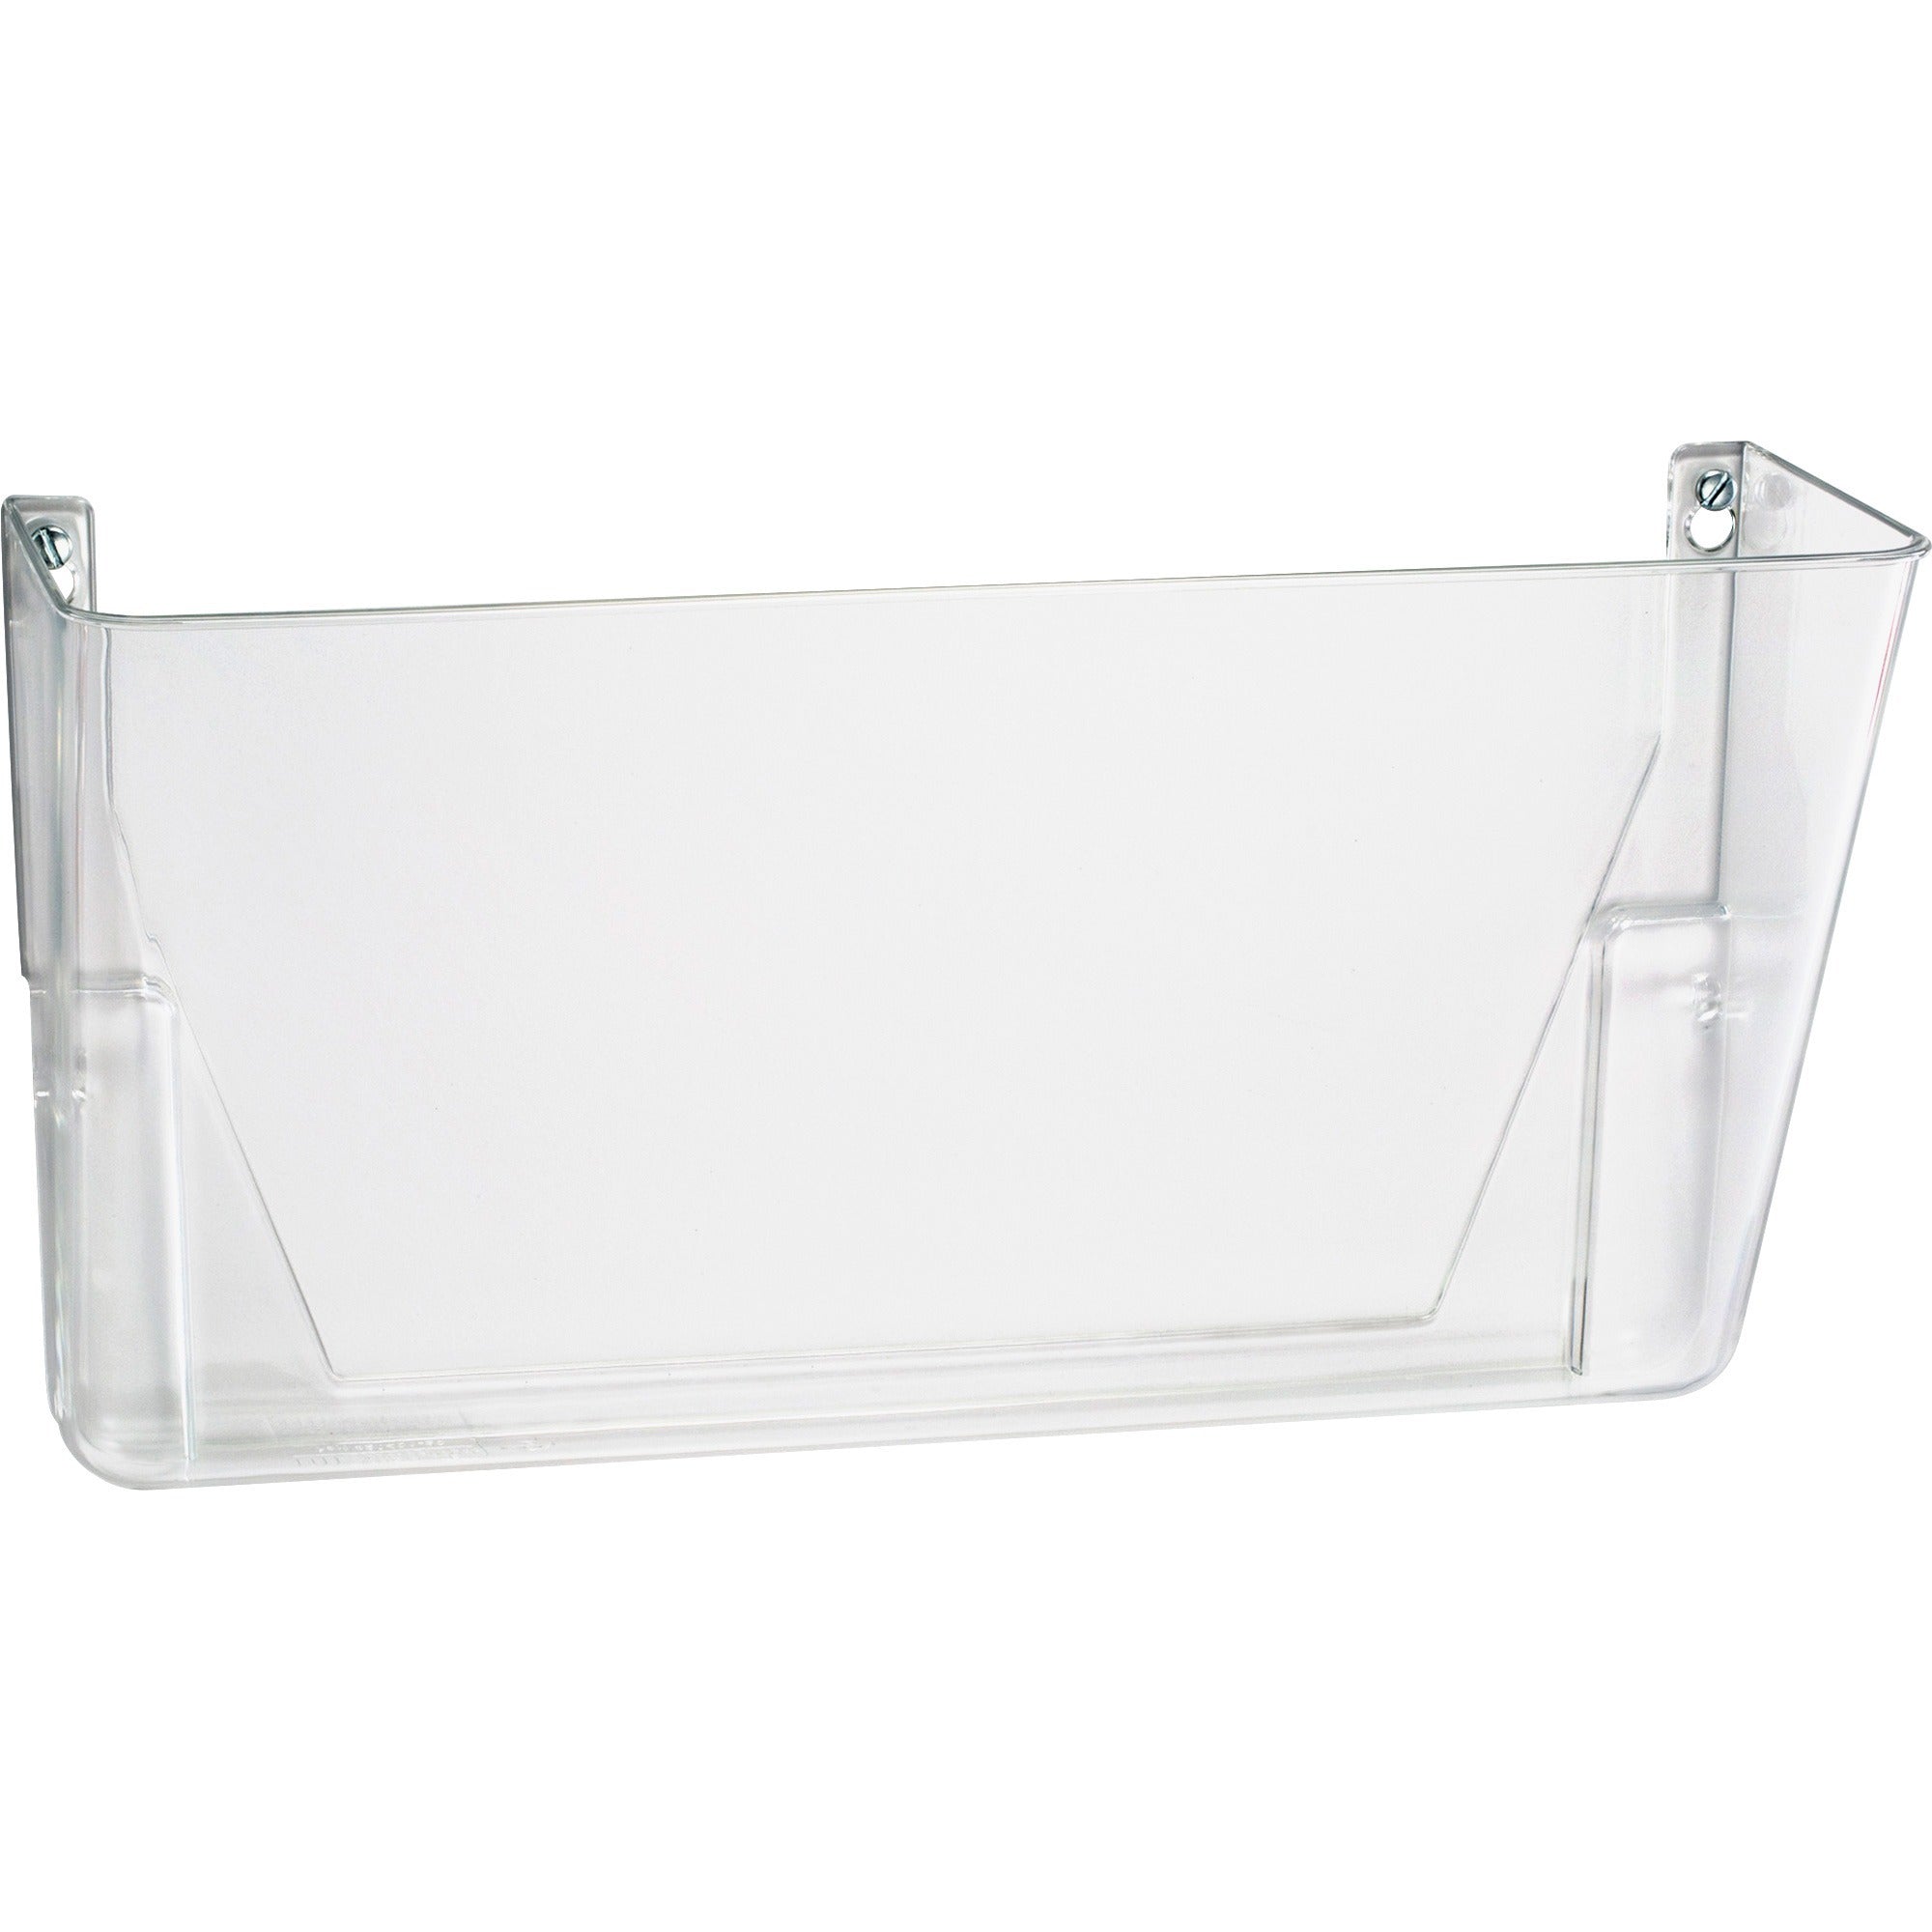 Officemate Mountable Wall File - 7" Height x 13" Width x 4.1" Depth - Clear - Plastic - 1 Each - 